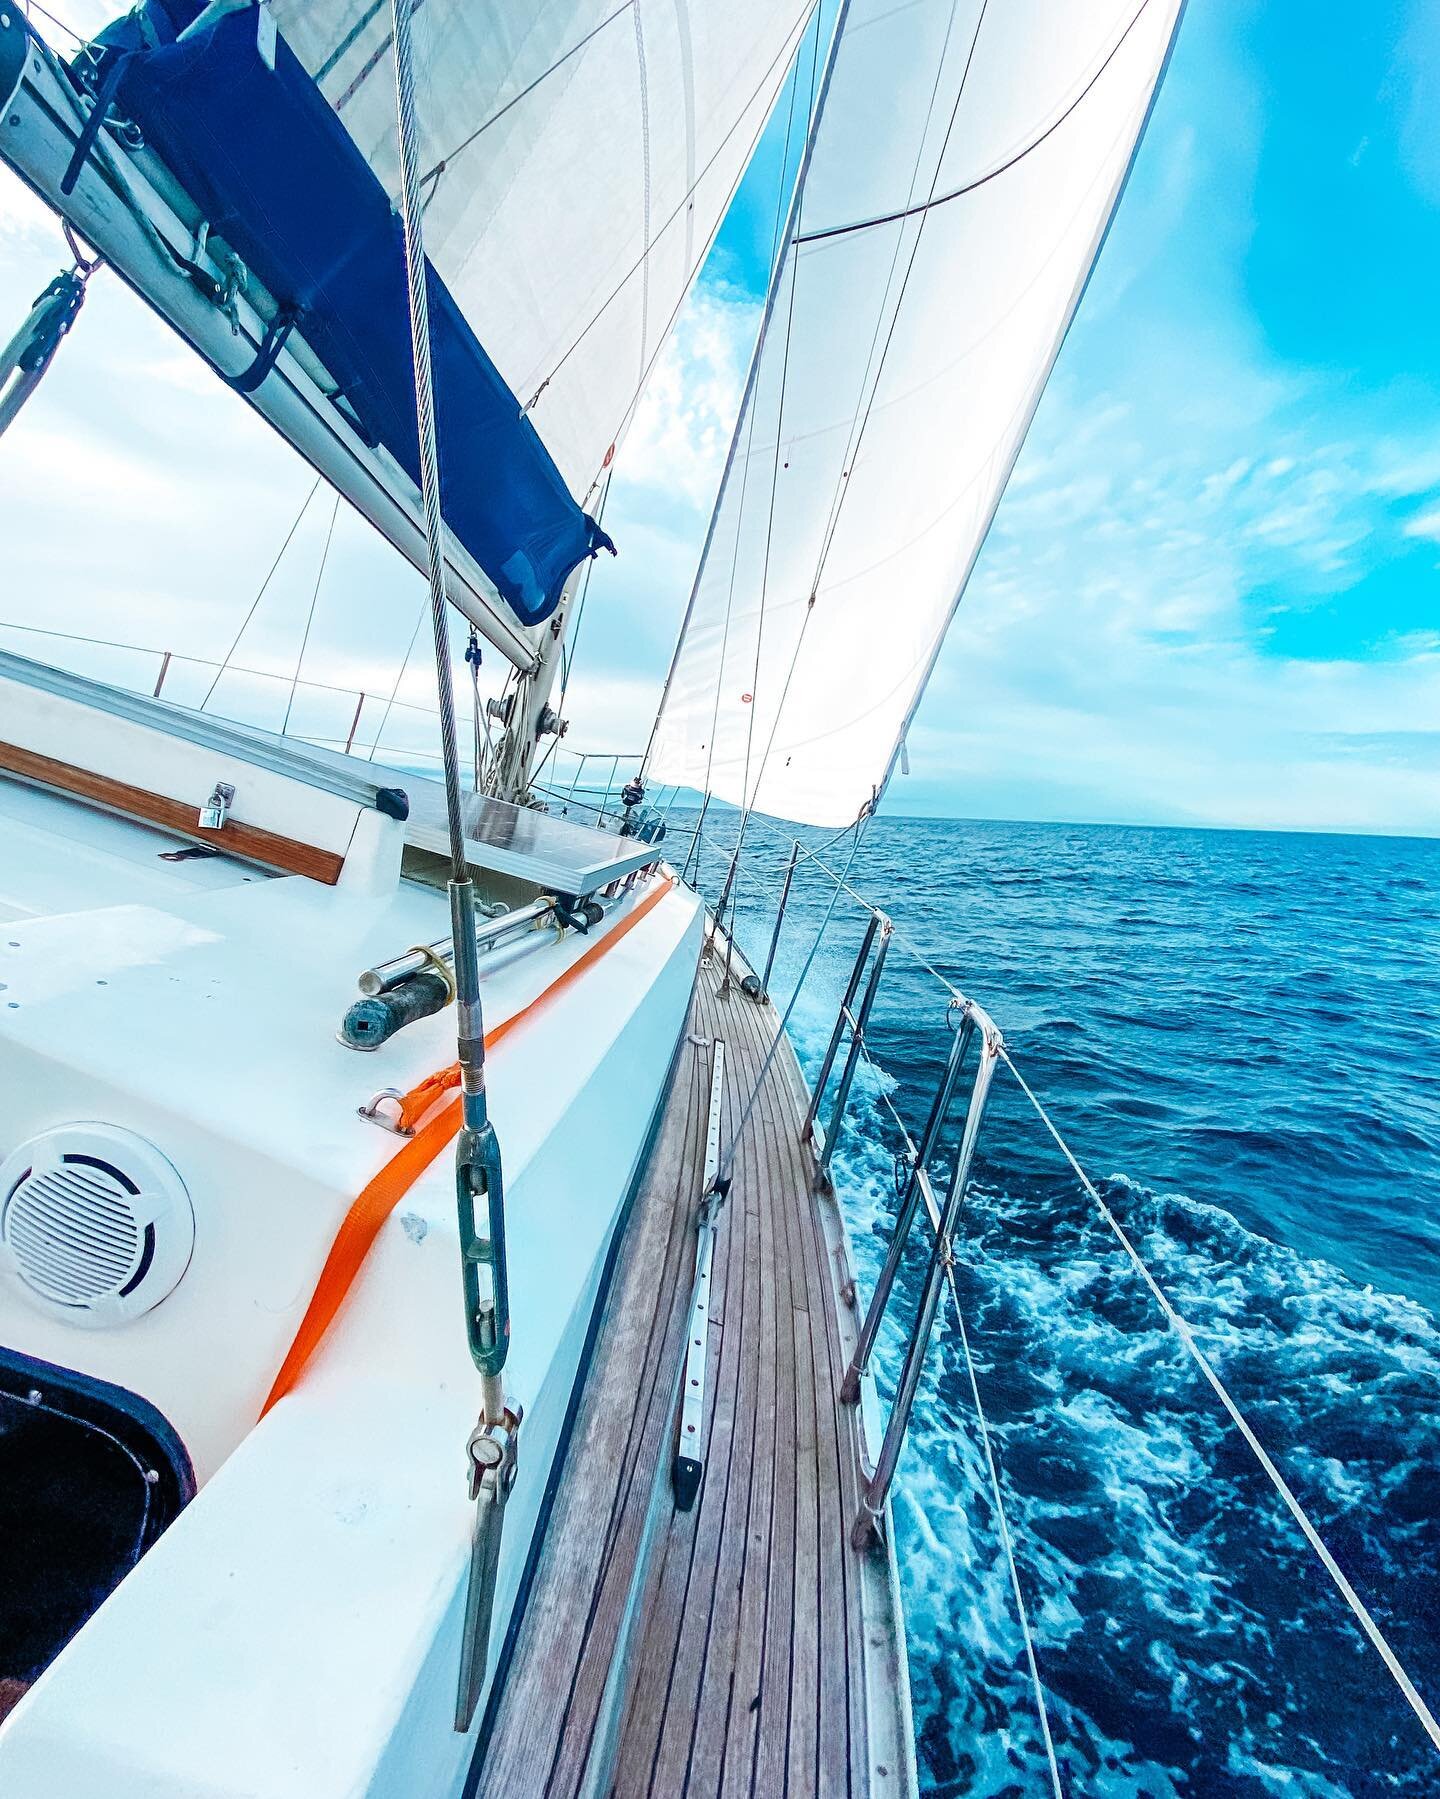 We were calculating mileage in our logbook last night and realised we had sailed over 1000 nautical miles since we bought Teulu 6 months ago! 1160 to be precise! That&rsquo;s quite the feeling 😀

〰️

#sails #sailing #sail #yacht #adventure #freedom 